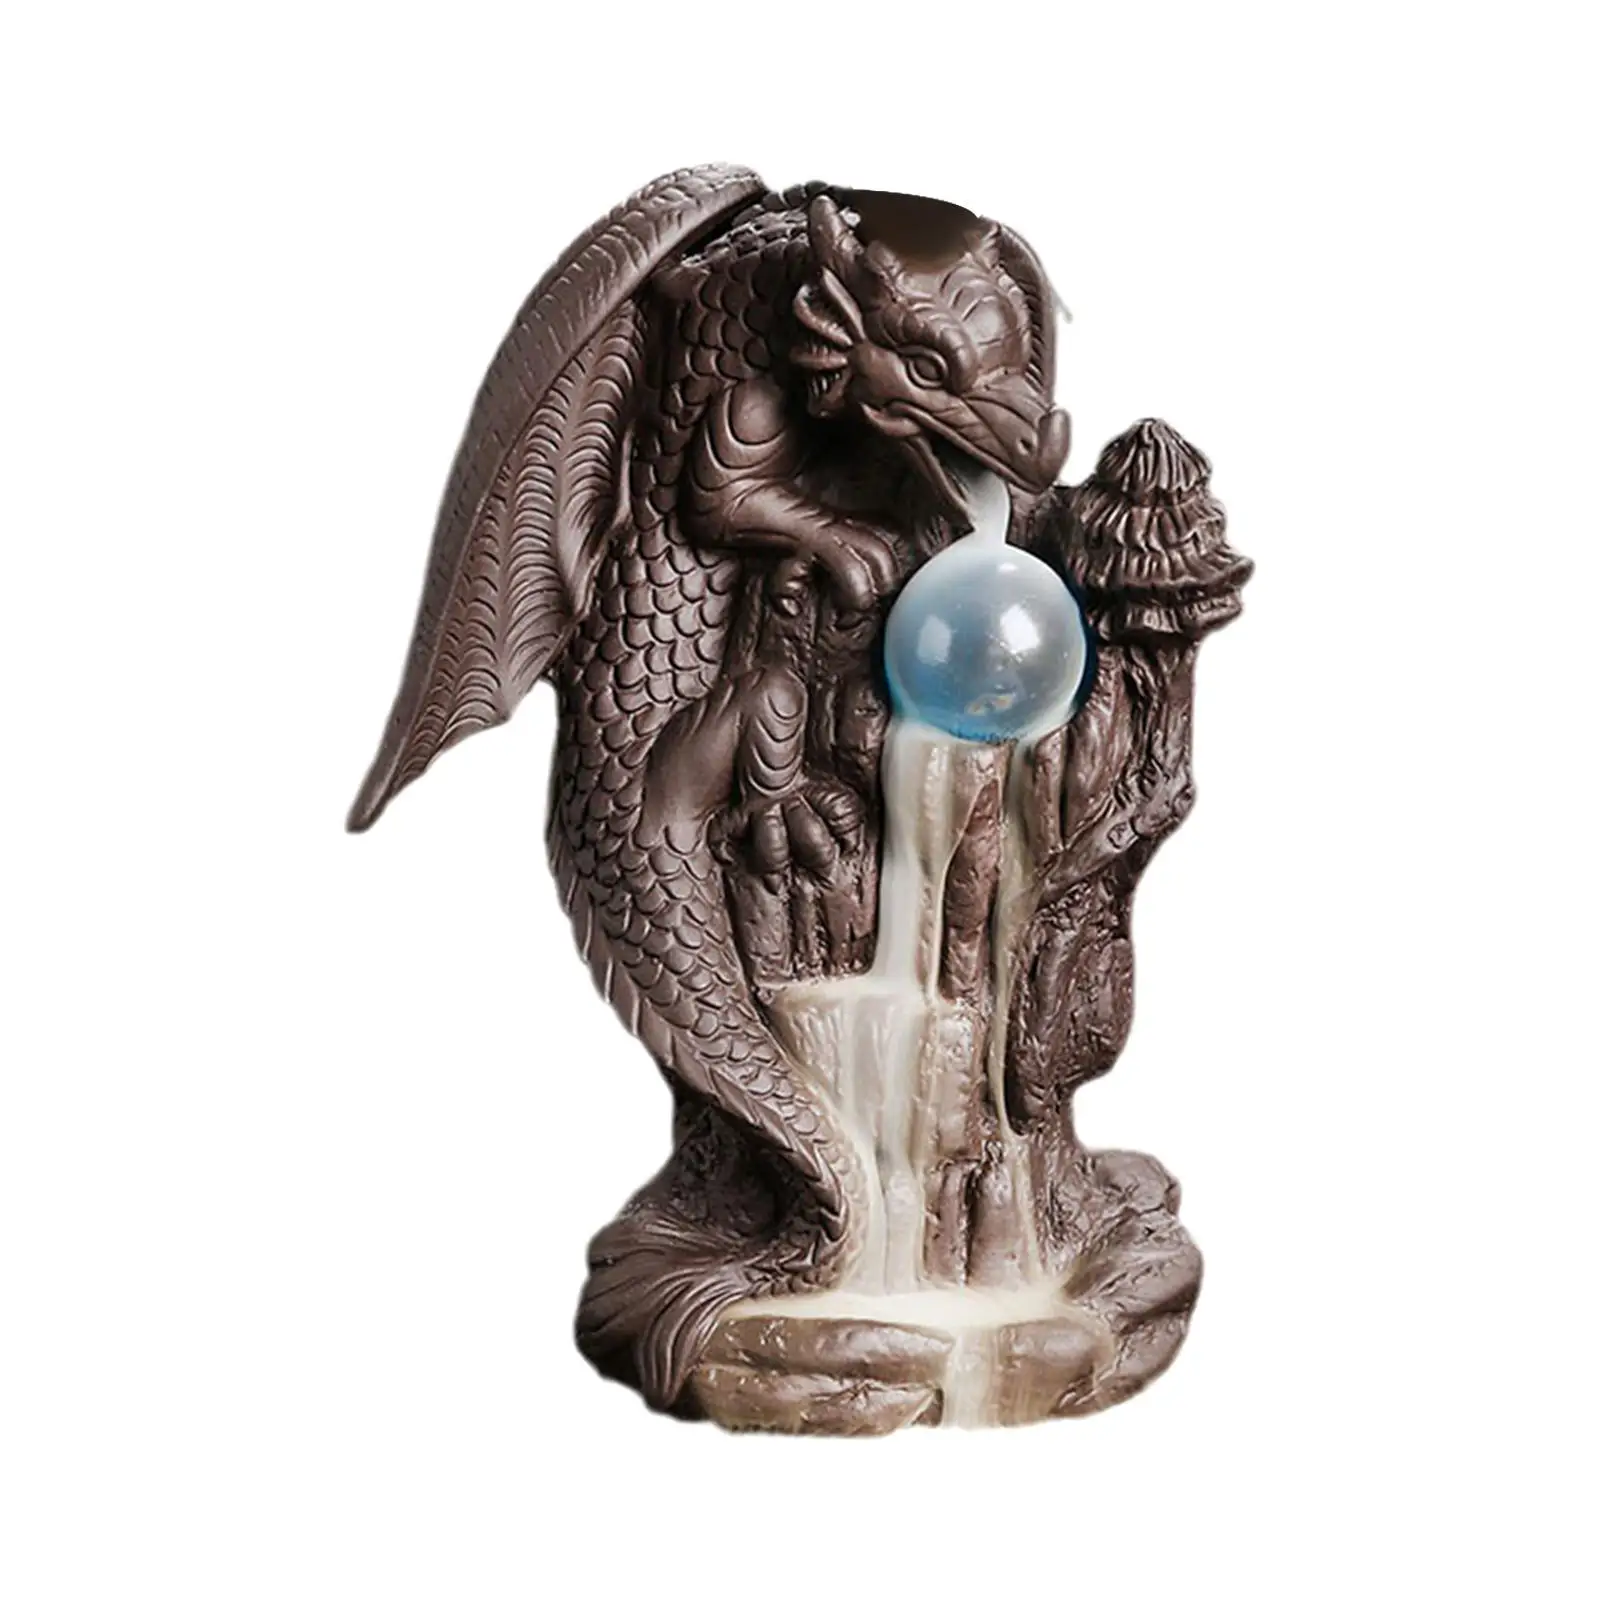 Waterfall Backflow Incense Holder Home Decoration Decor Room Decor Ornament for Relaxation Living Room Home Office Desktop